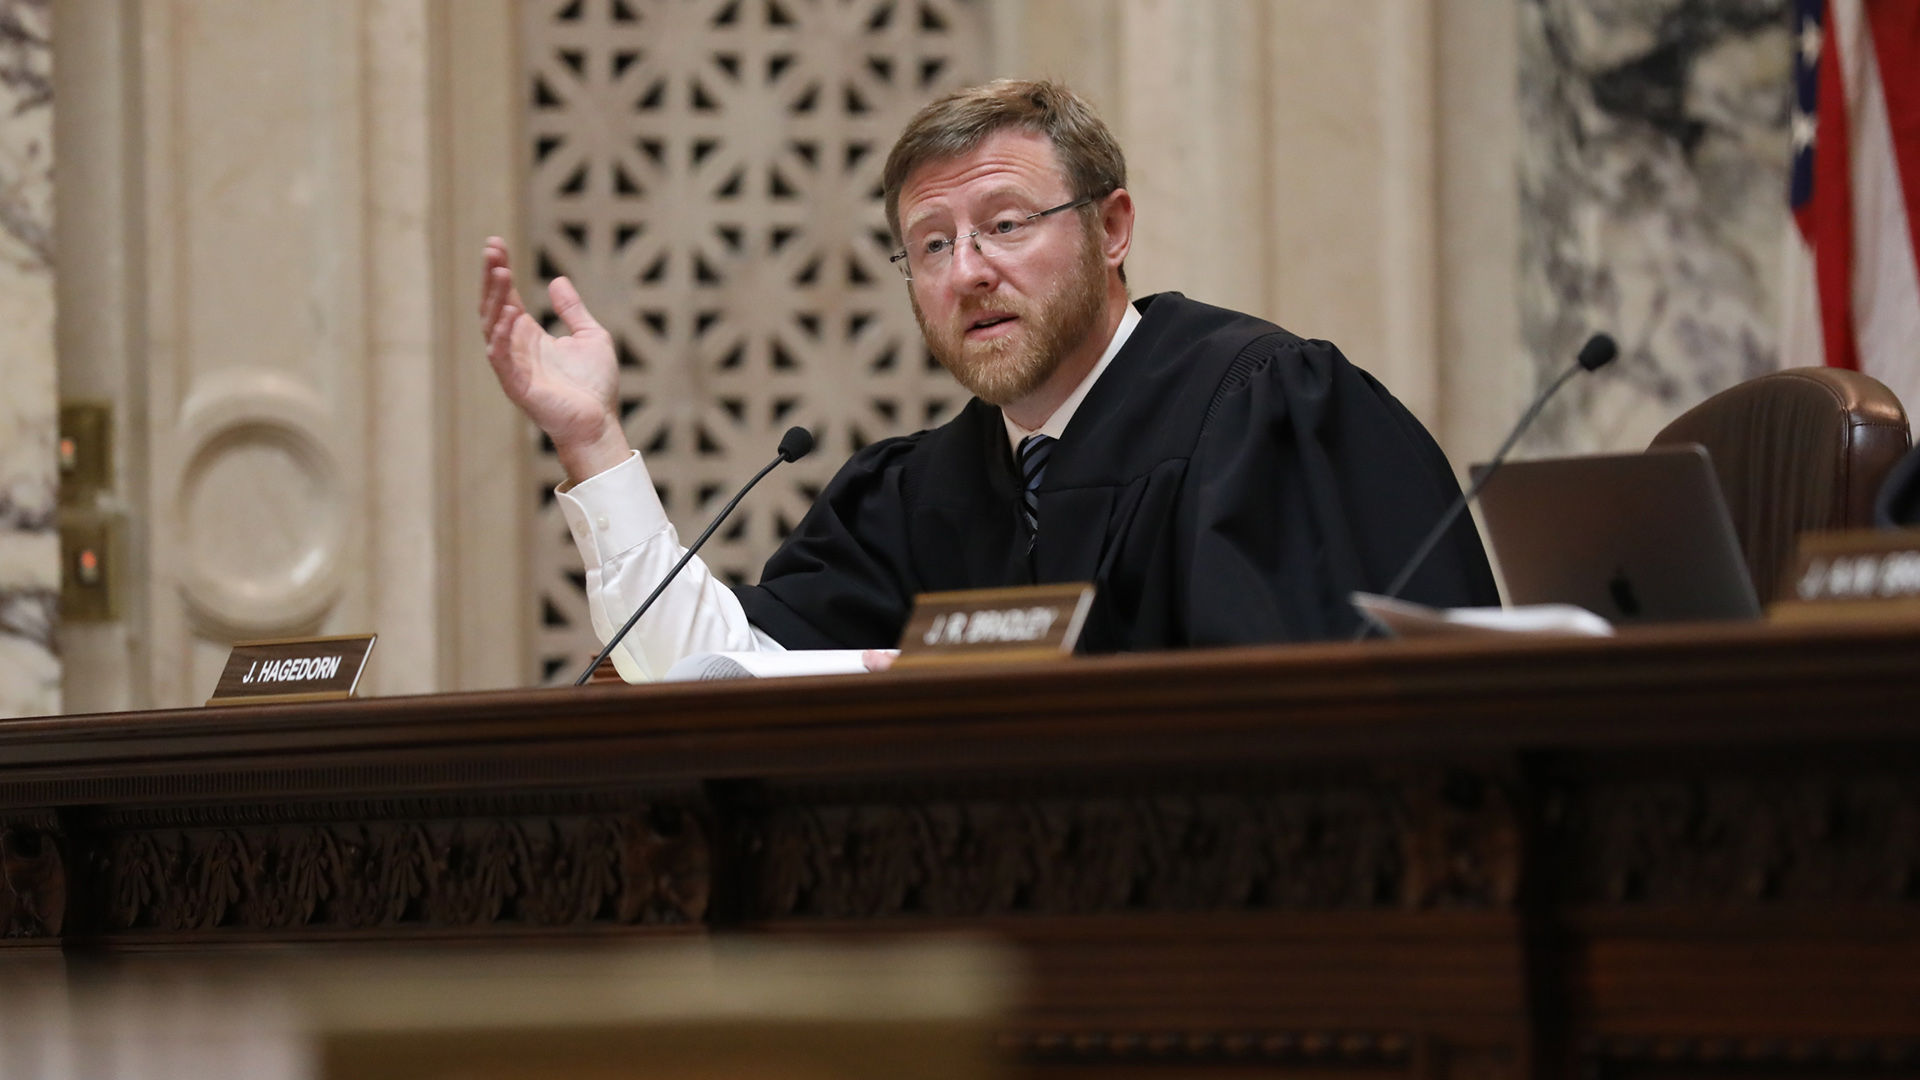 Brian Hagedorn sits at a judicial bench and gestures with his right hand while speaking into a table-mounted microphone, with papers and an open laptop computer to his side, in a room with a U.S. flag and marble masonry.